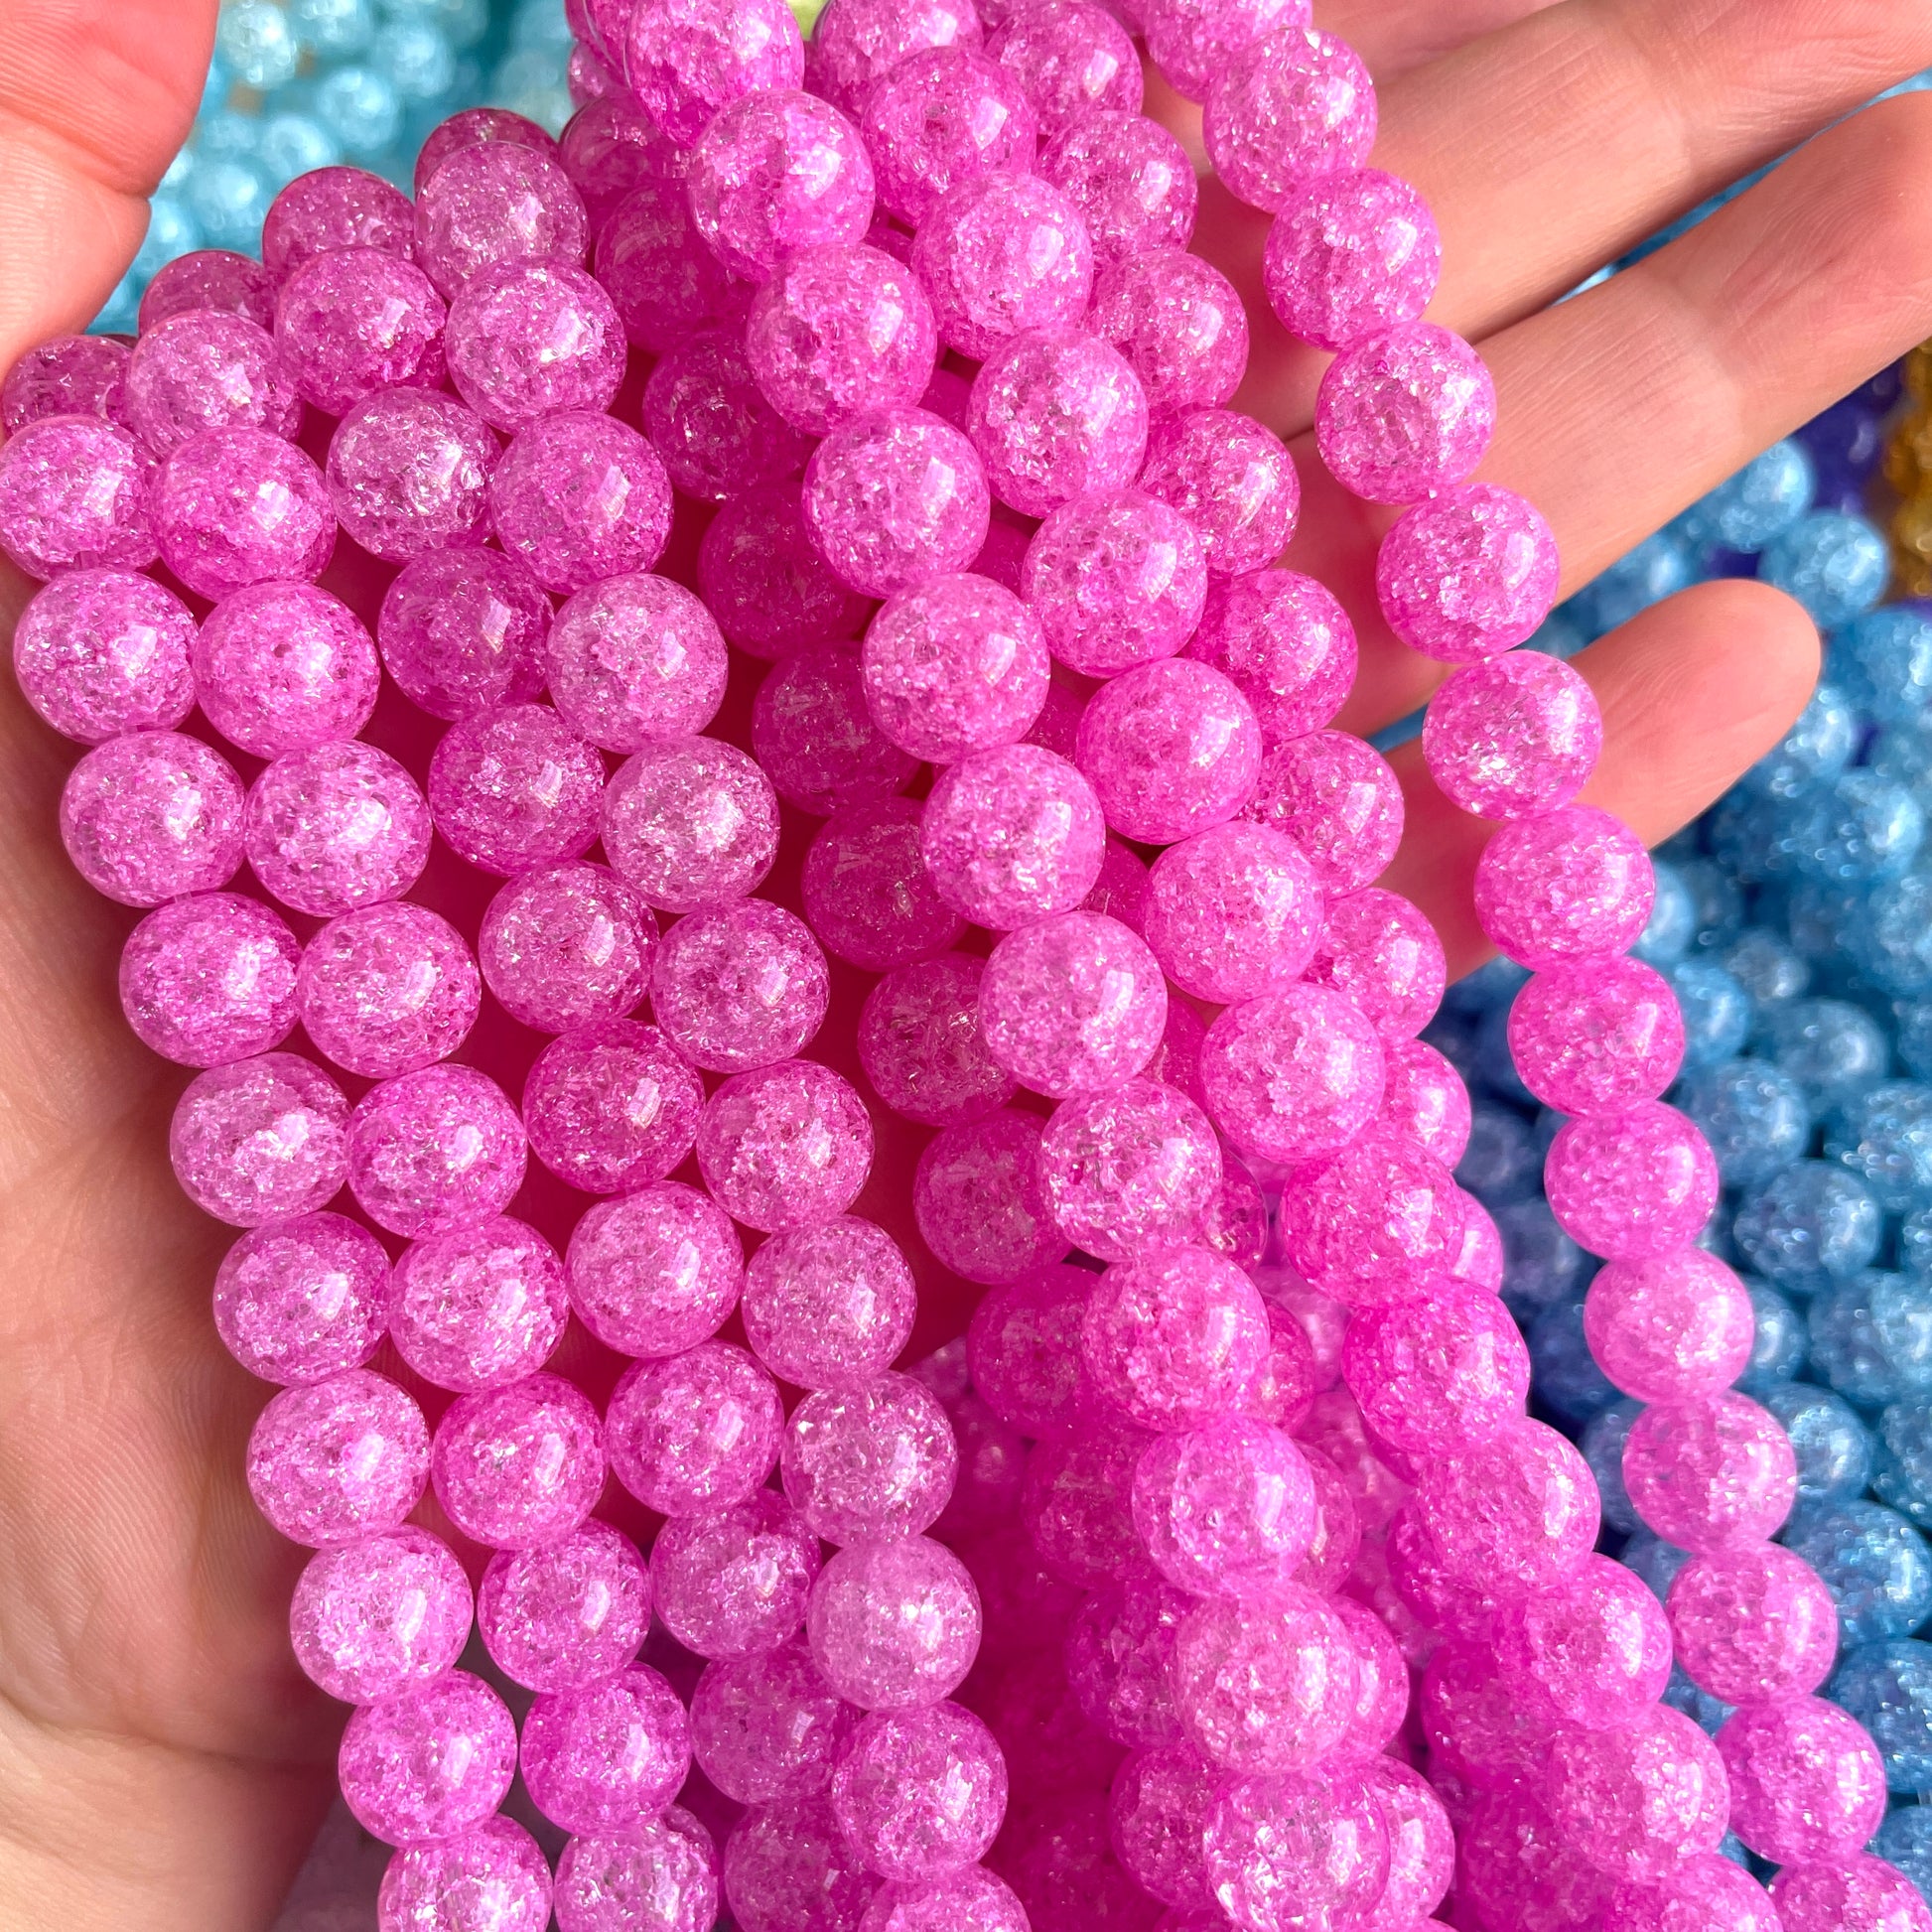 2 Strands/lot 10mm Pink Popcorn Crystal Round Beads Stone Beads Breast Cancer Awareness New Beads Arrivals Other Stone Beads Charms Beads Beyond